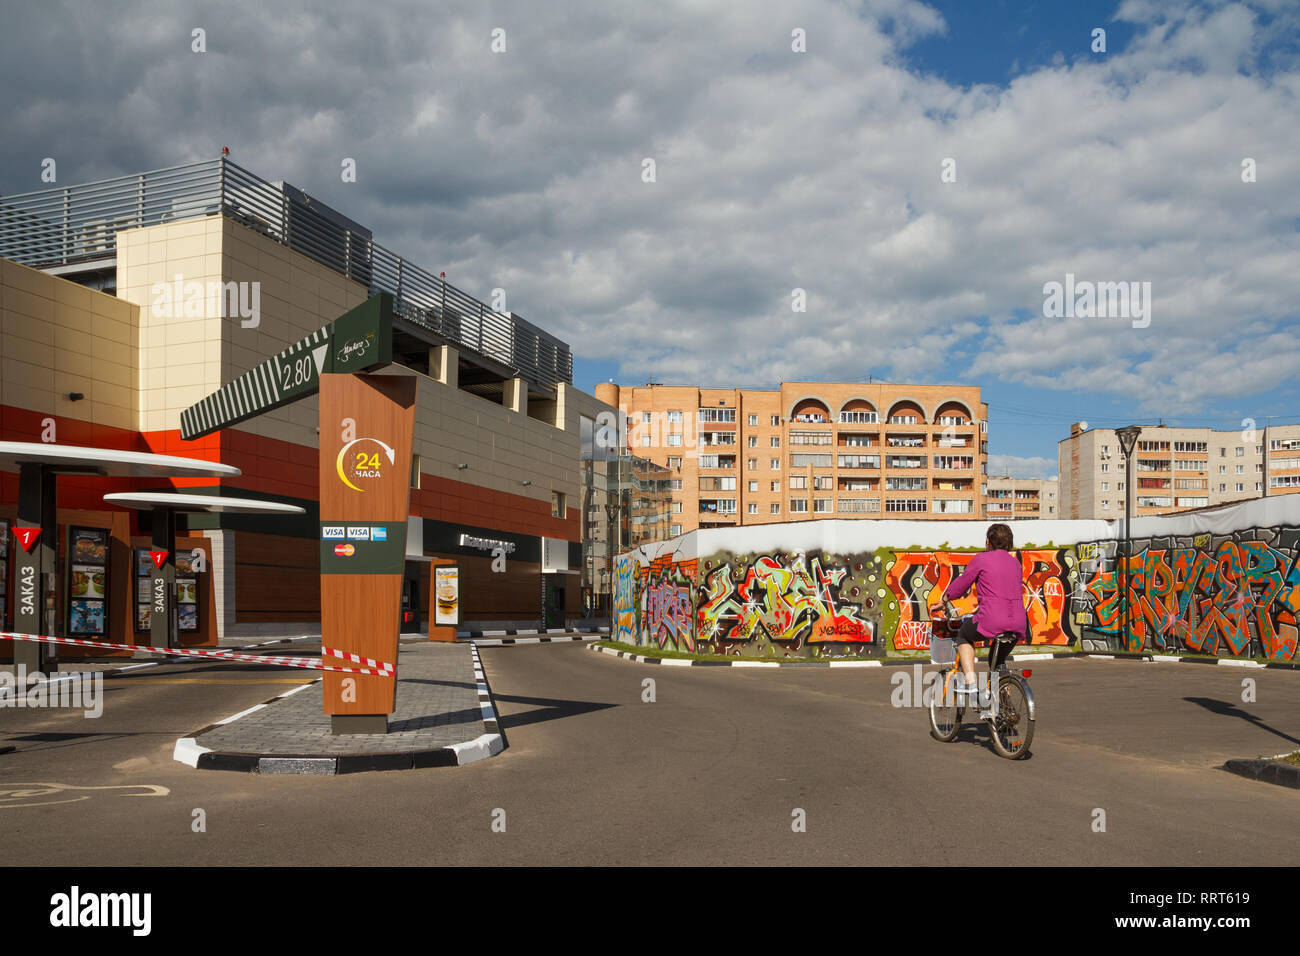 Dubna, Russia - Jul 21, 2014: Daytime street view of the city with a woman riding bike. Stock Photo